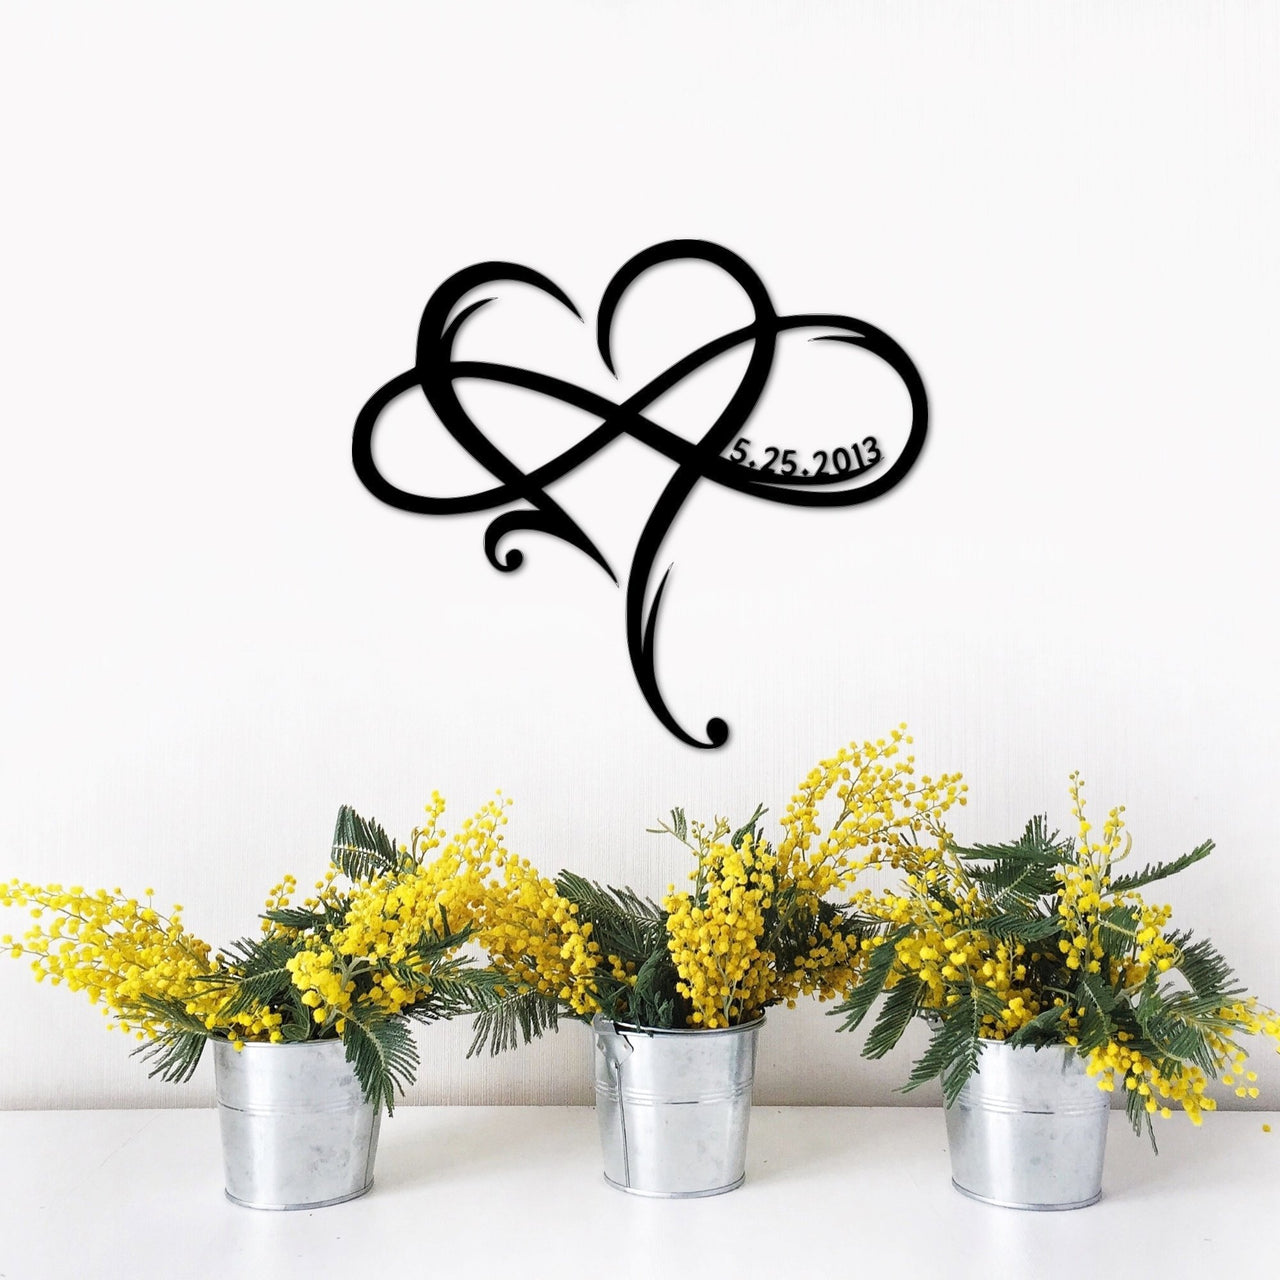 Personalized Infinity Heart Sign with Custom Wedding Date | Metal Wall Decor | Wedding Gift for Couple | Anniversary Gift | Date Sign